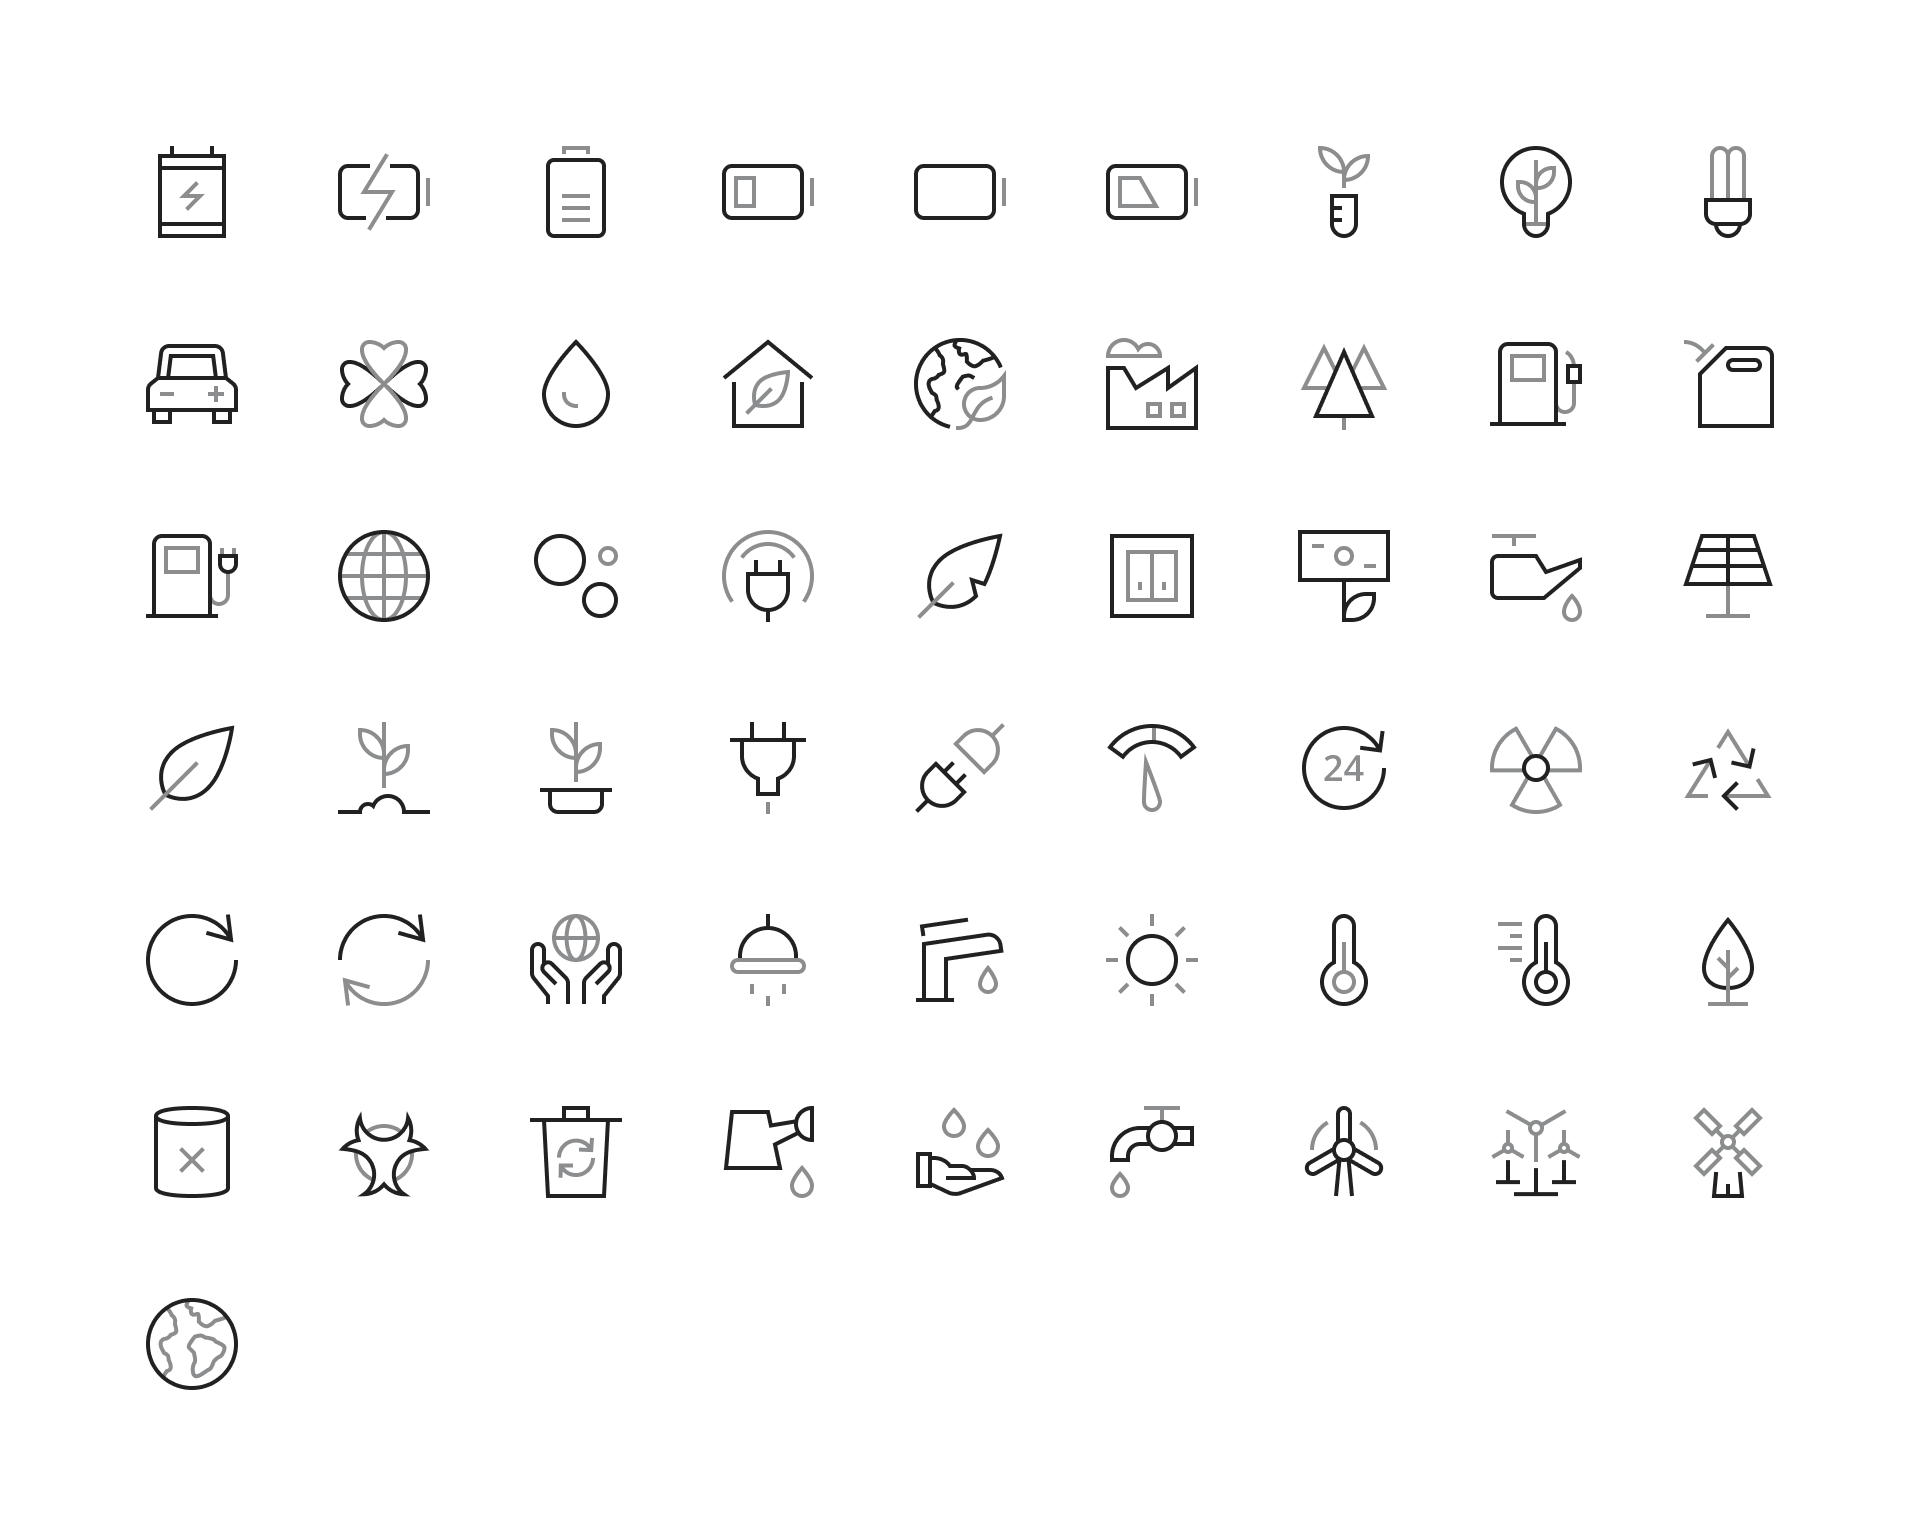 Energy and Environment Icons